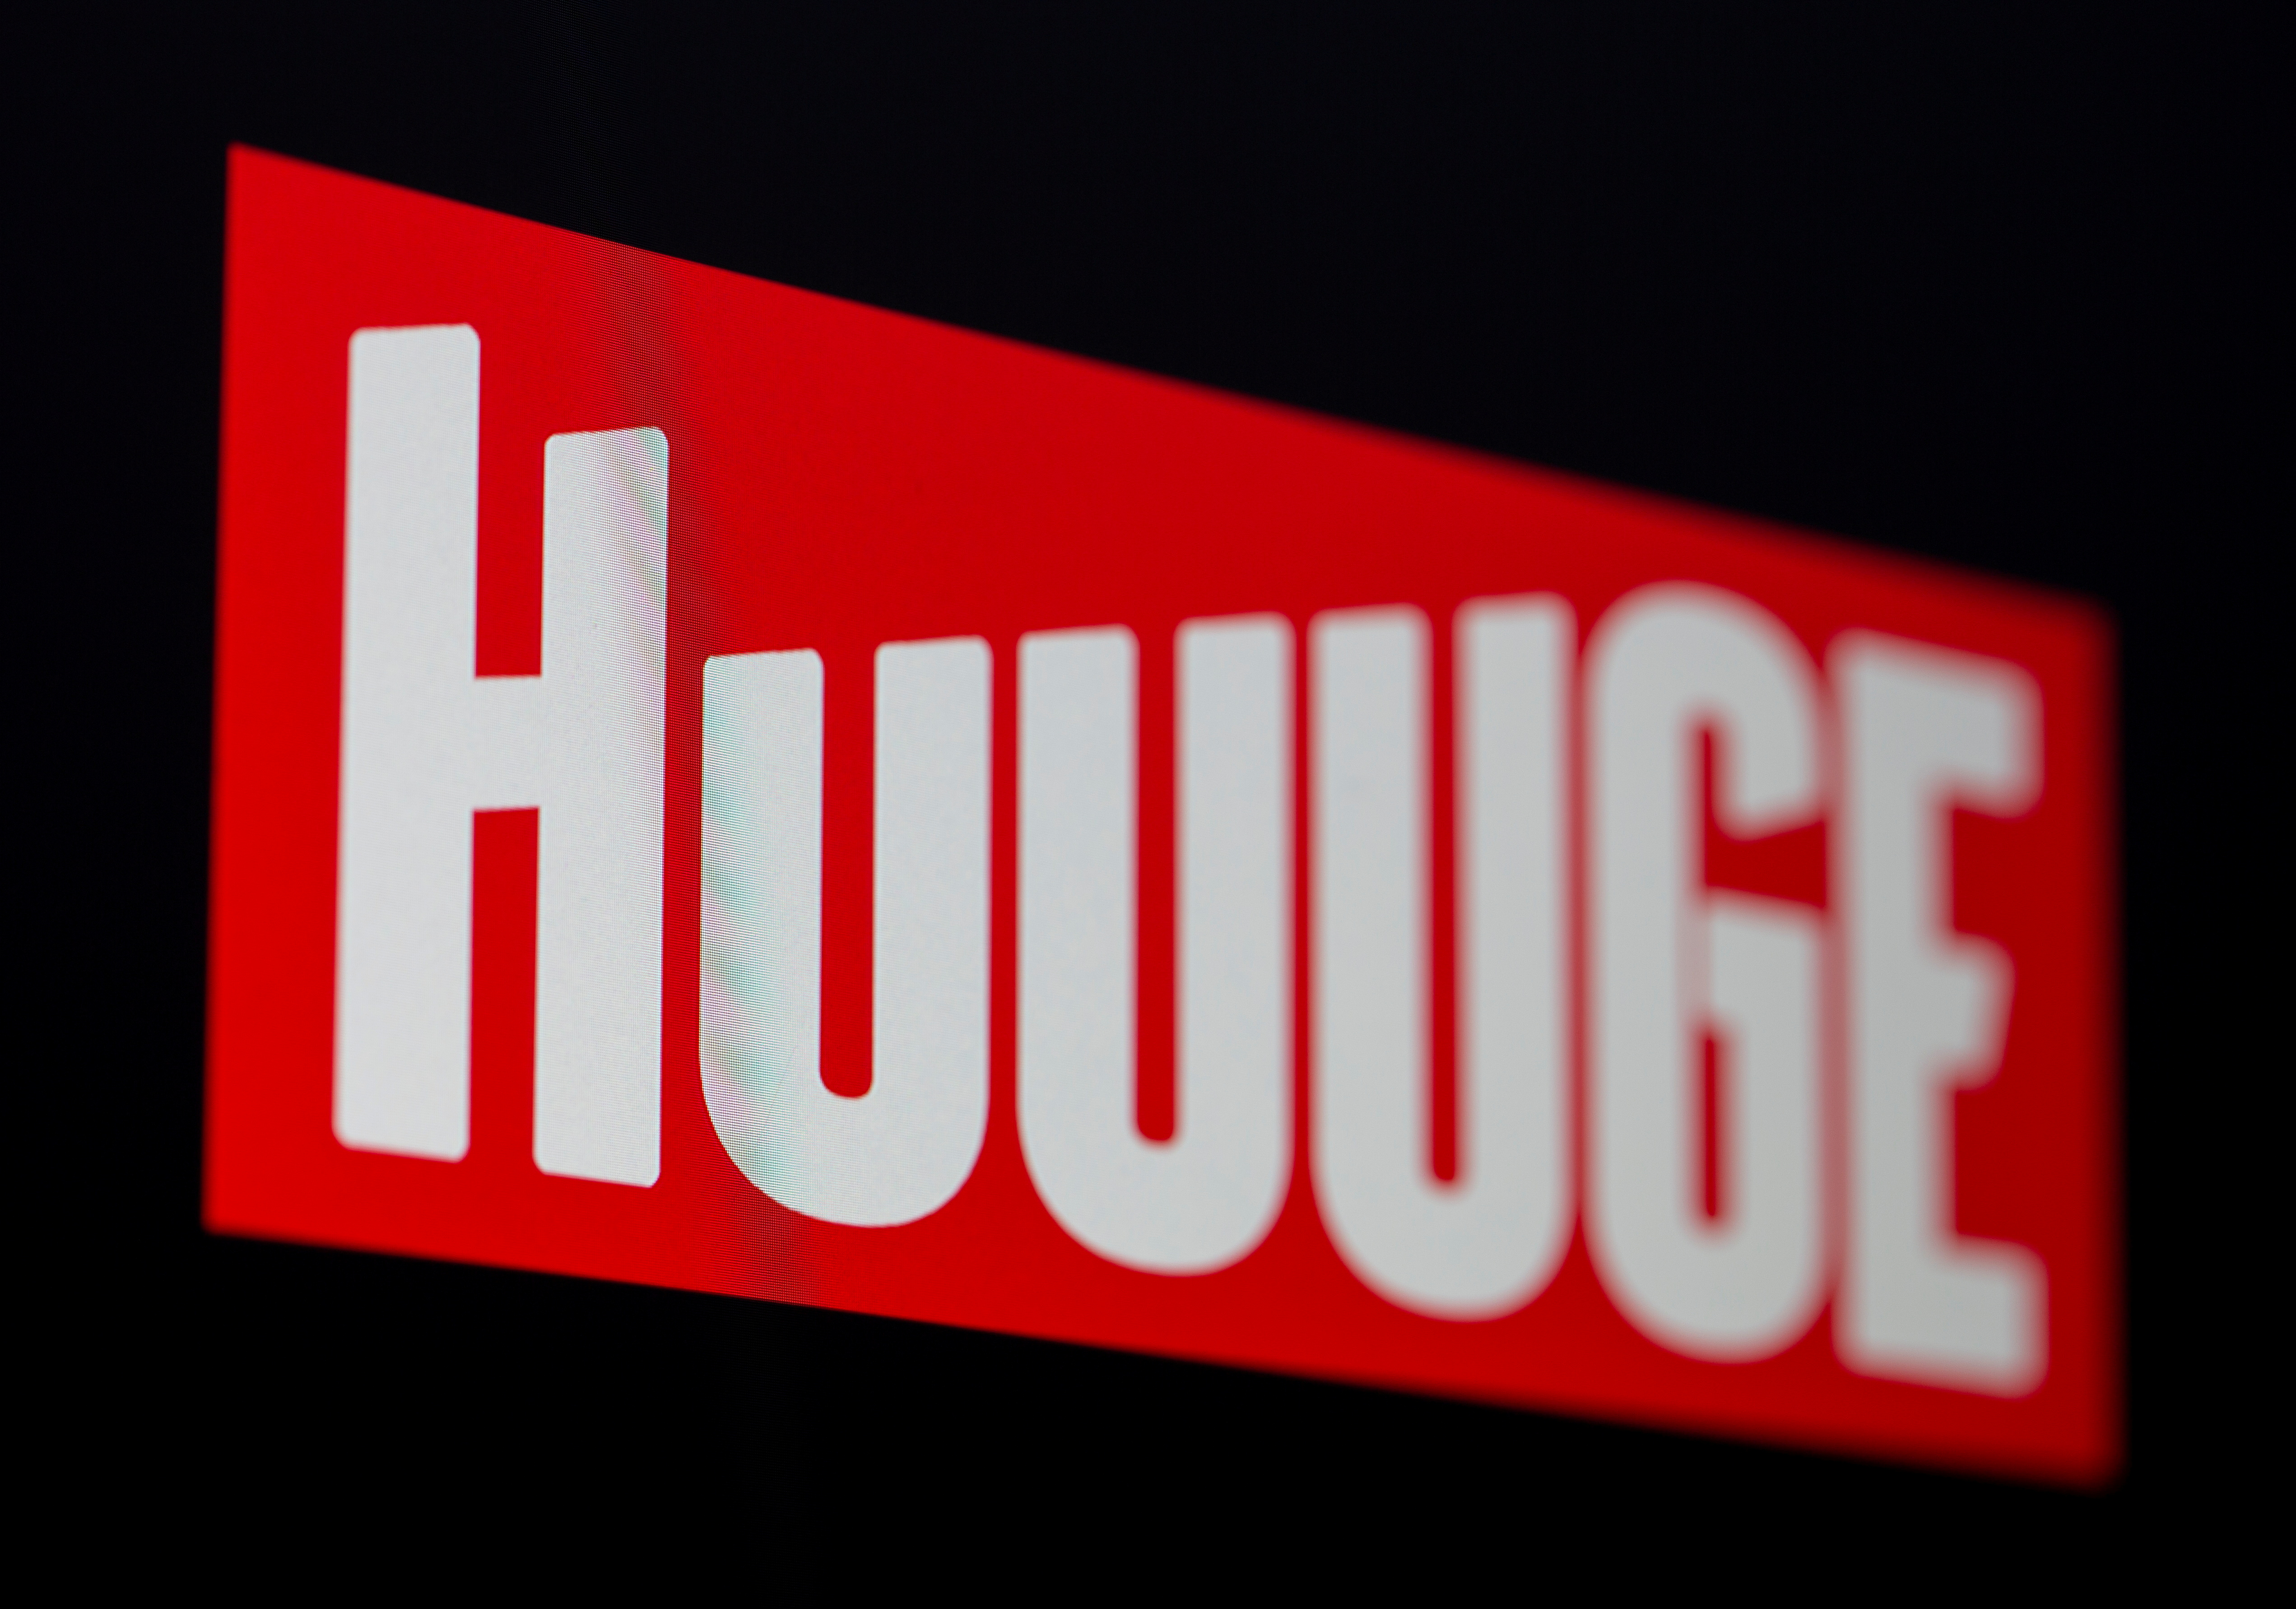 Huuuge logo is seen in this illustration picture